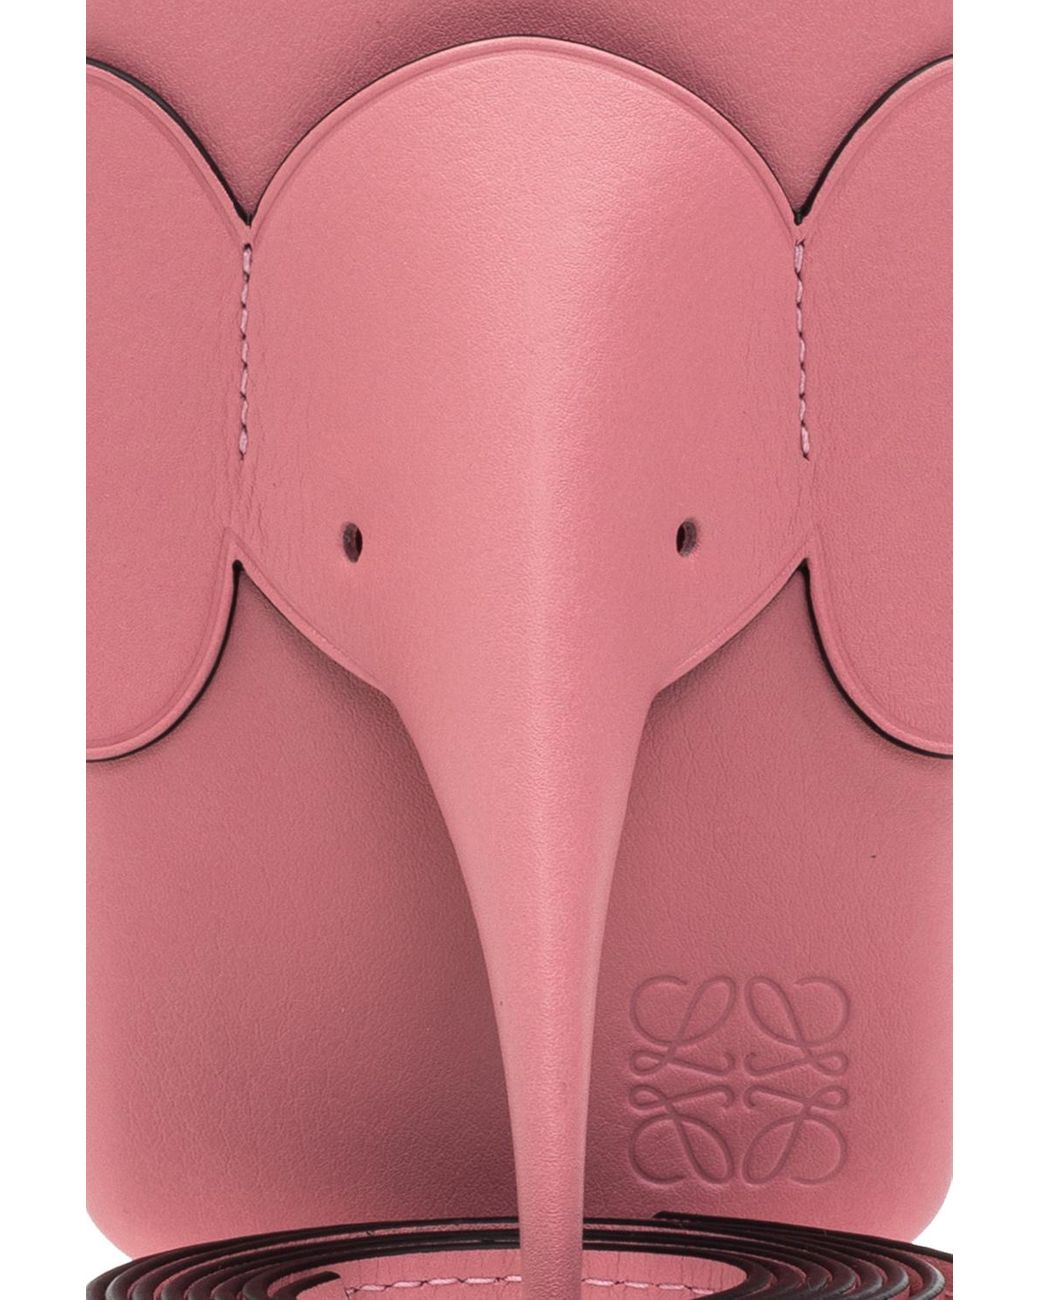 Loewe 'elephant' Iphone 11 Pro Max Case in Pink | Lyst